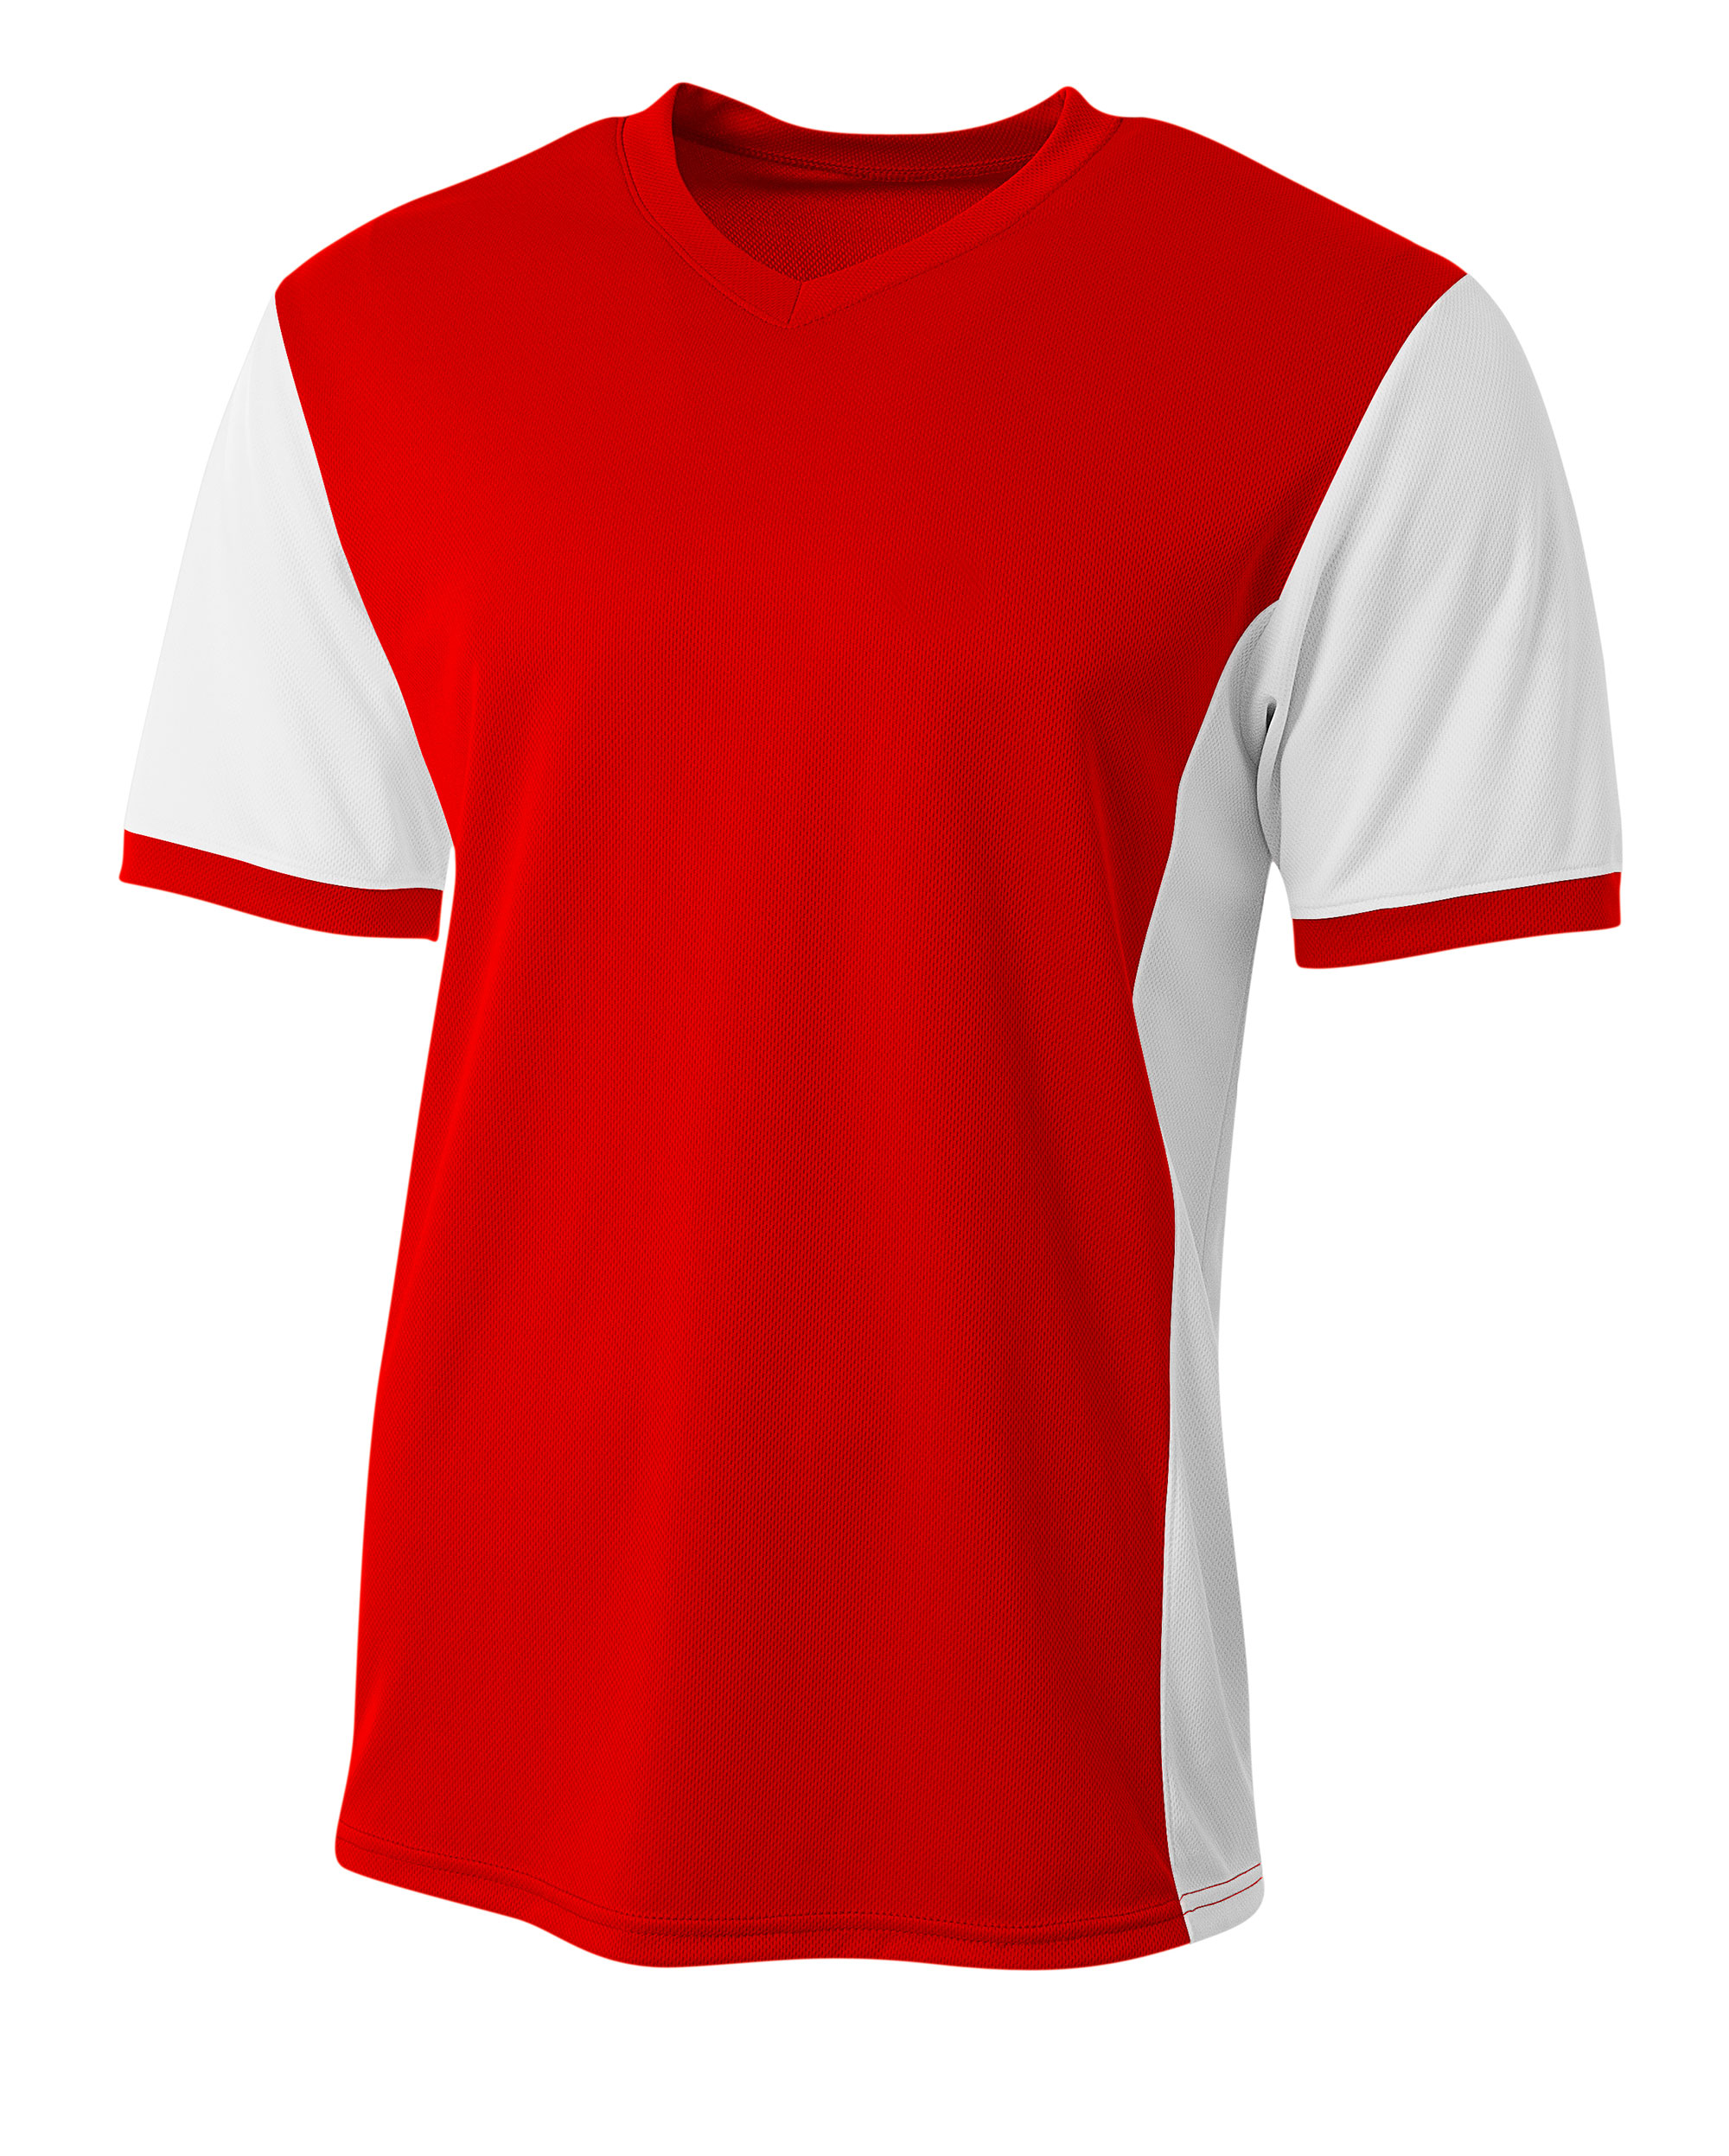 A4559 - Youth Premier Soccer Jersey - One Stop